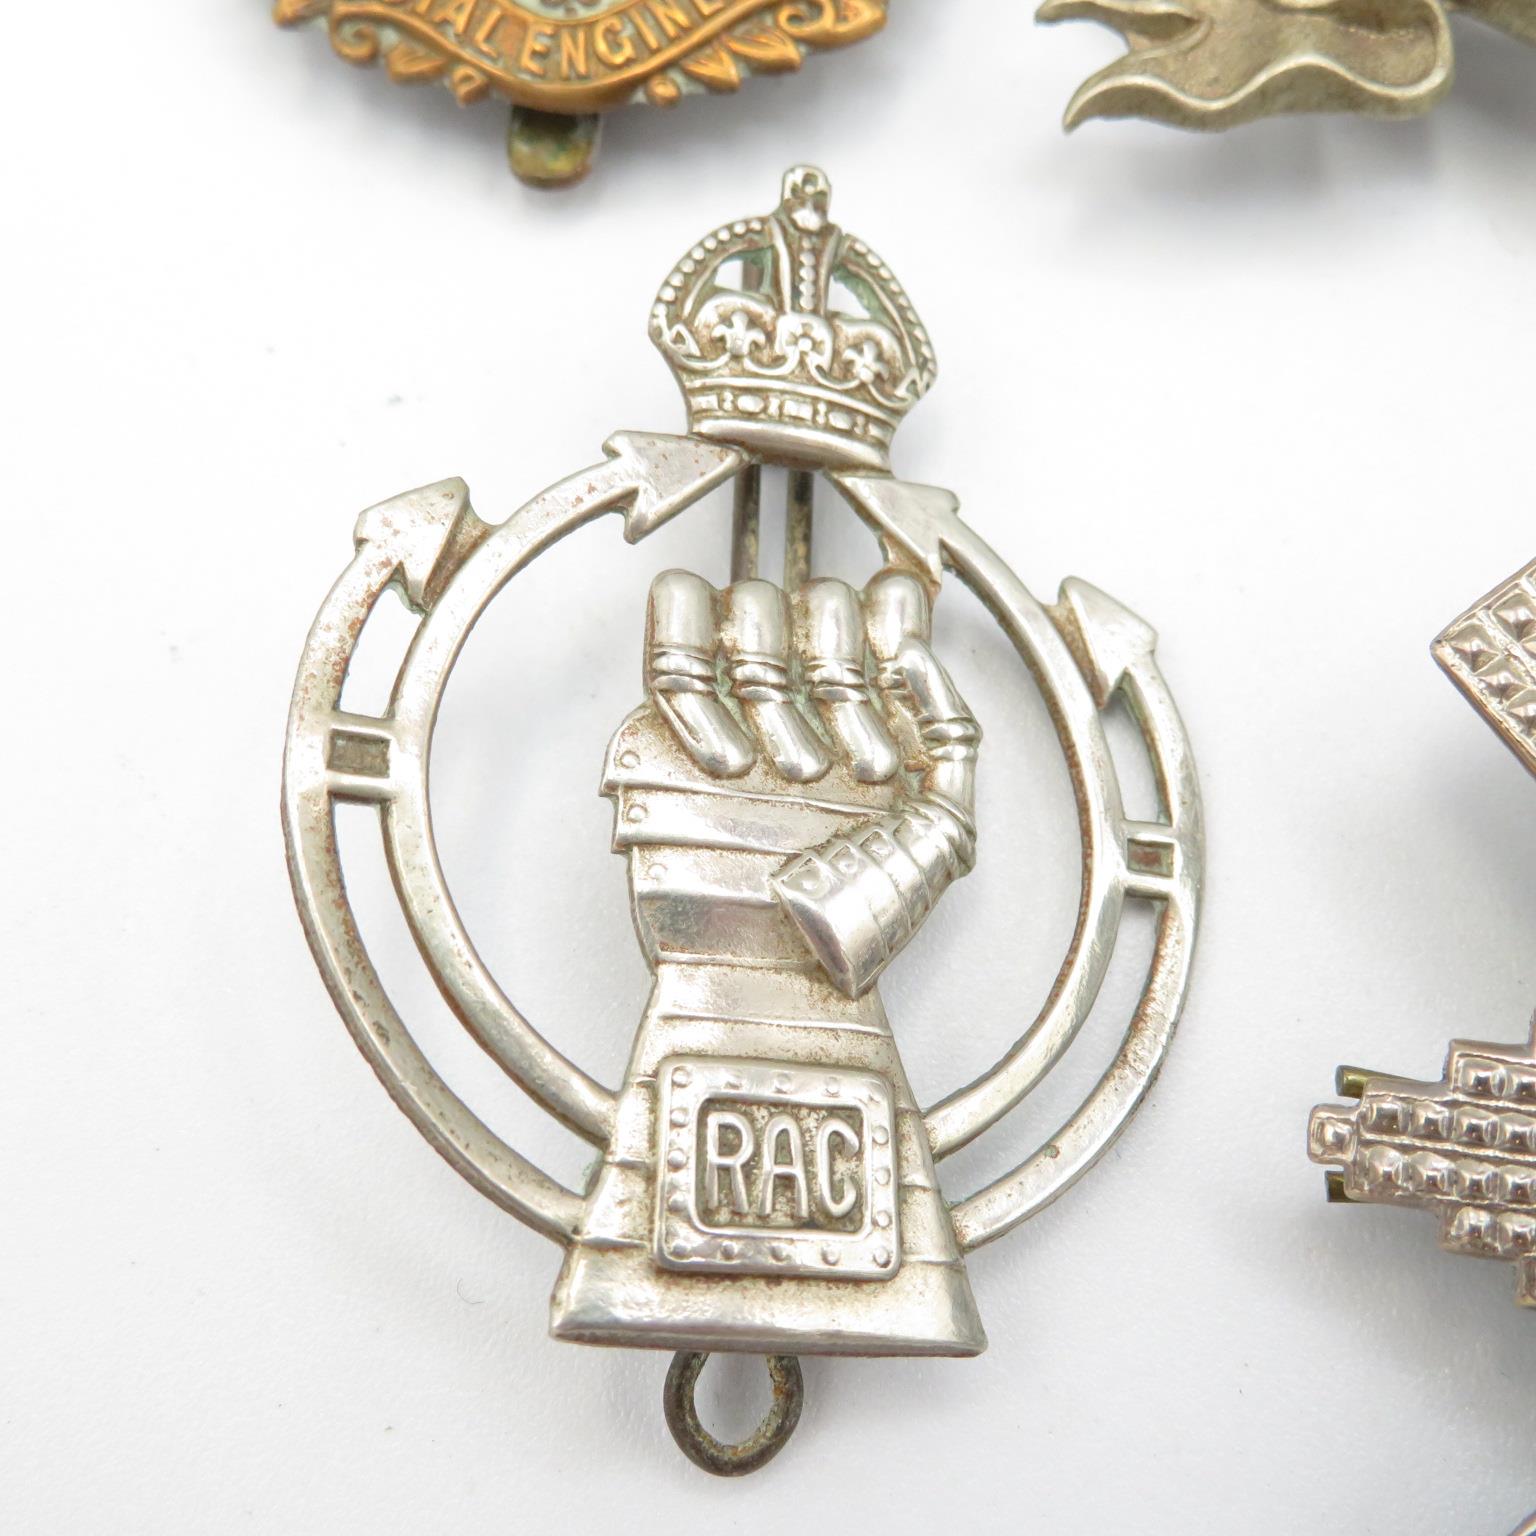 15x Military cap badges including Canadian and South Lancs etc. - - Image 13 of 15